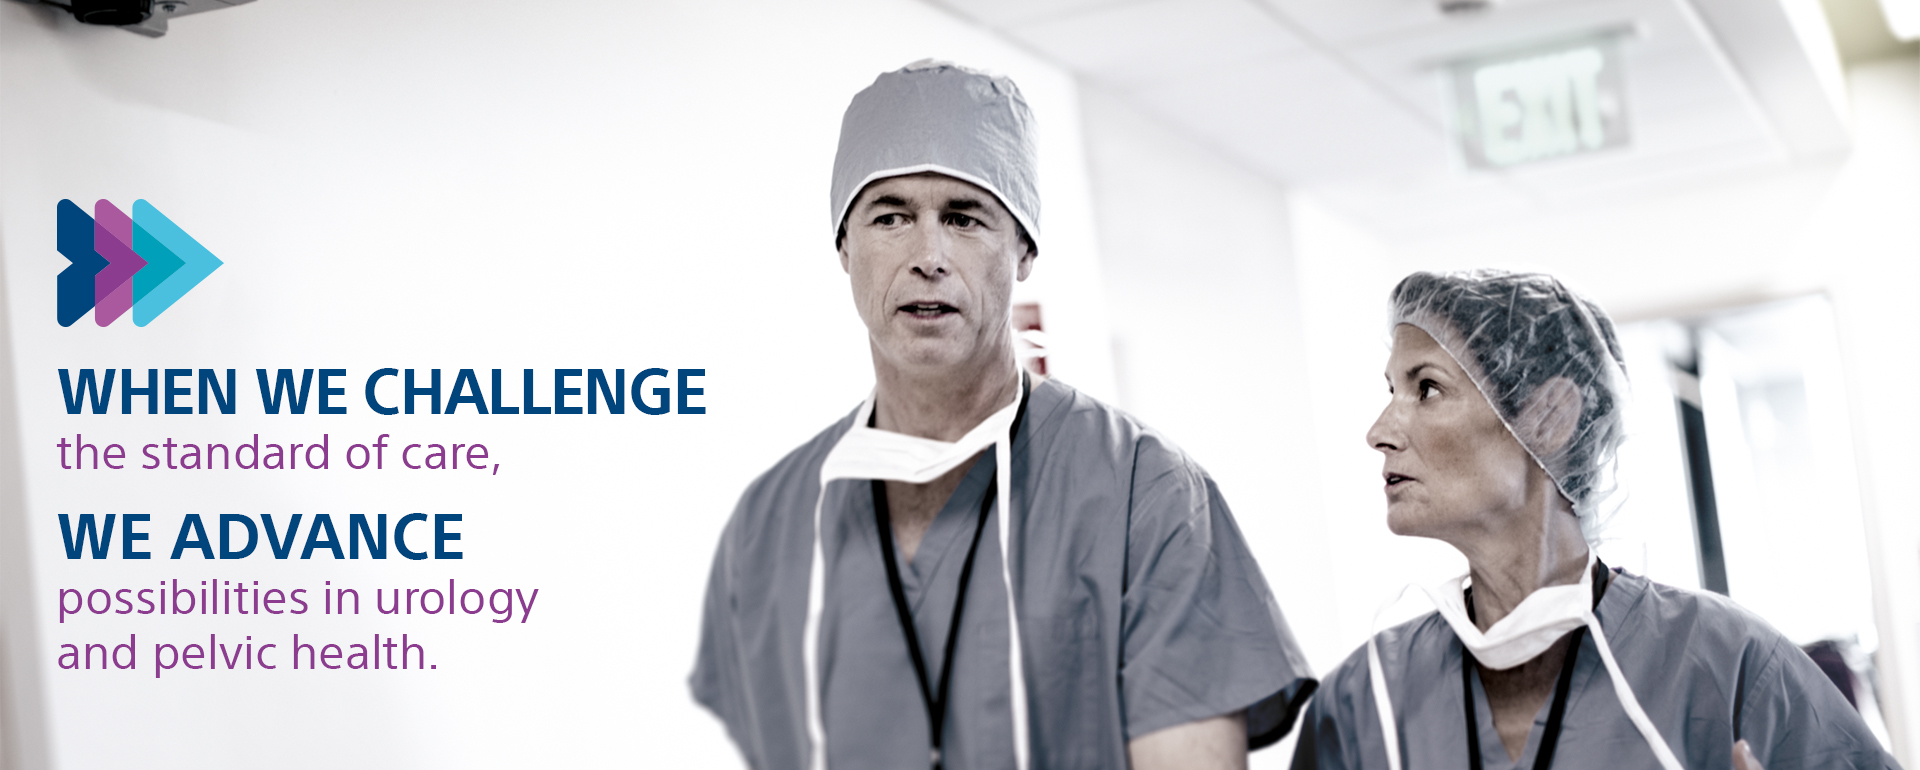 When we challenge the standard of care, we advance possibilities in urology and pelvic health.